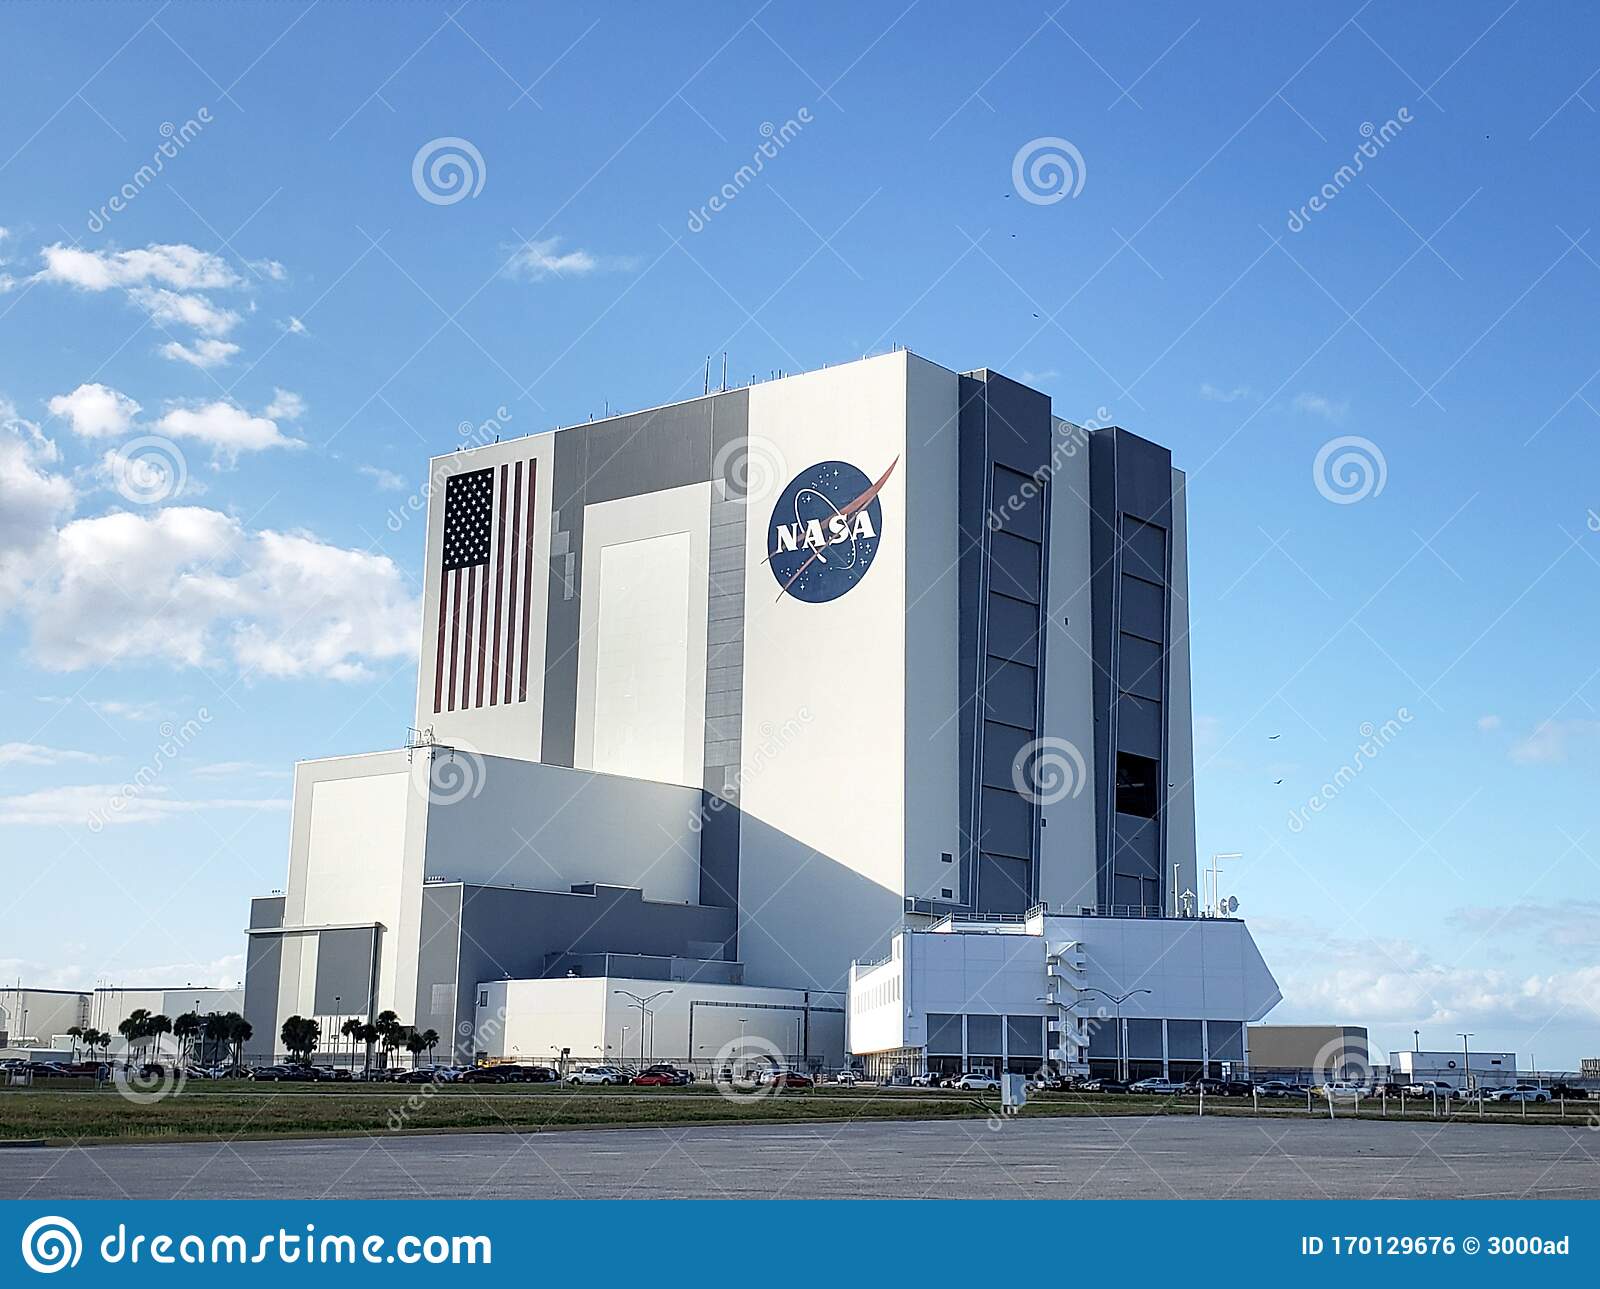 why did nasa choose cape canaveral florida for a launch site for missions in space